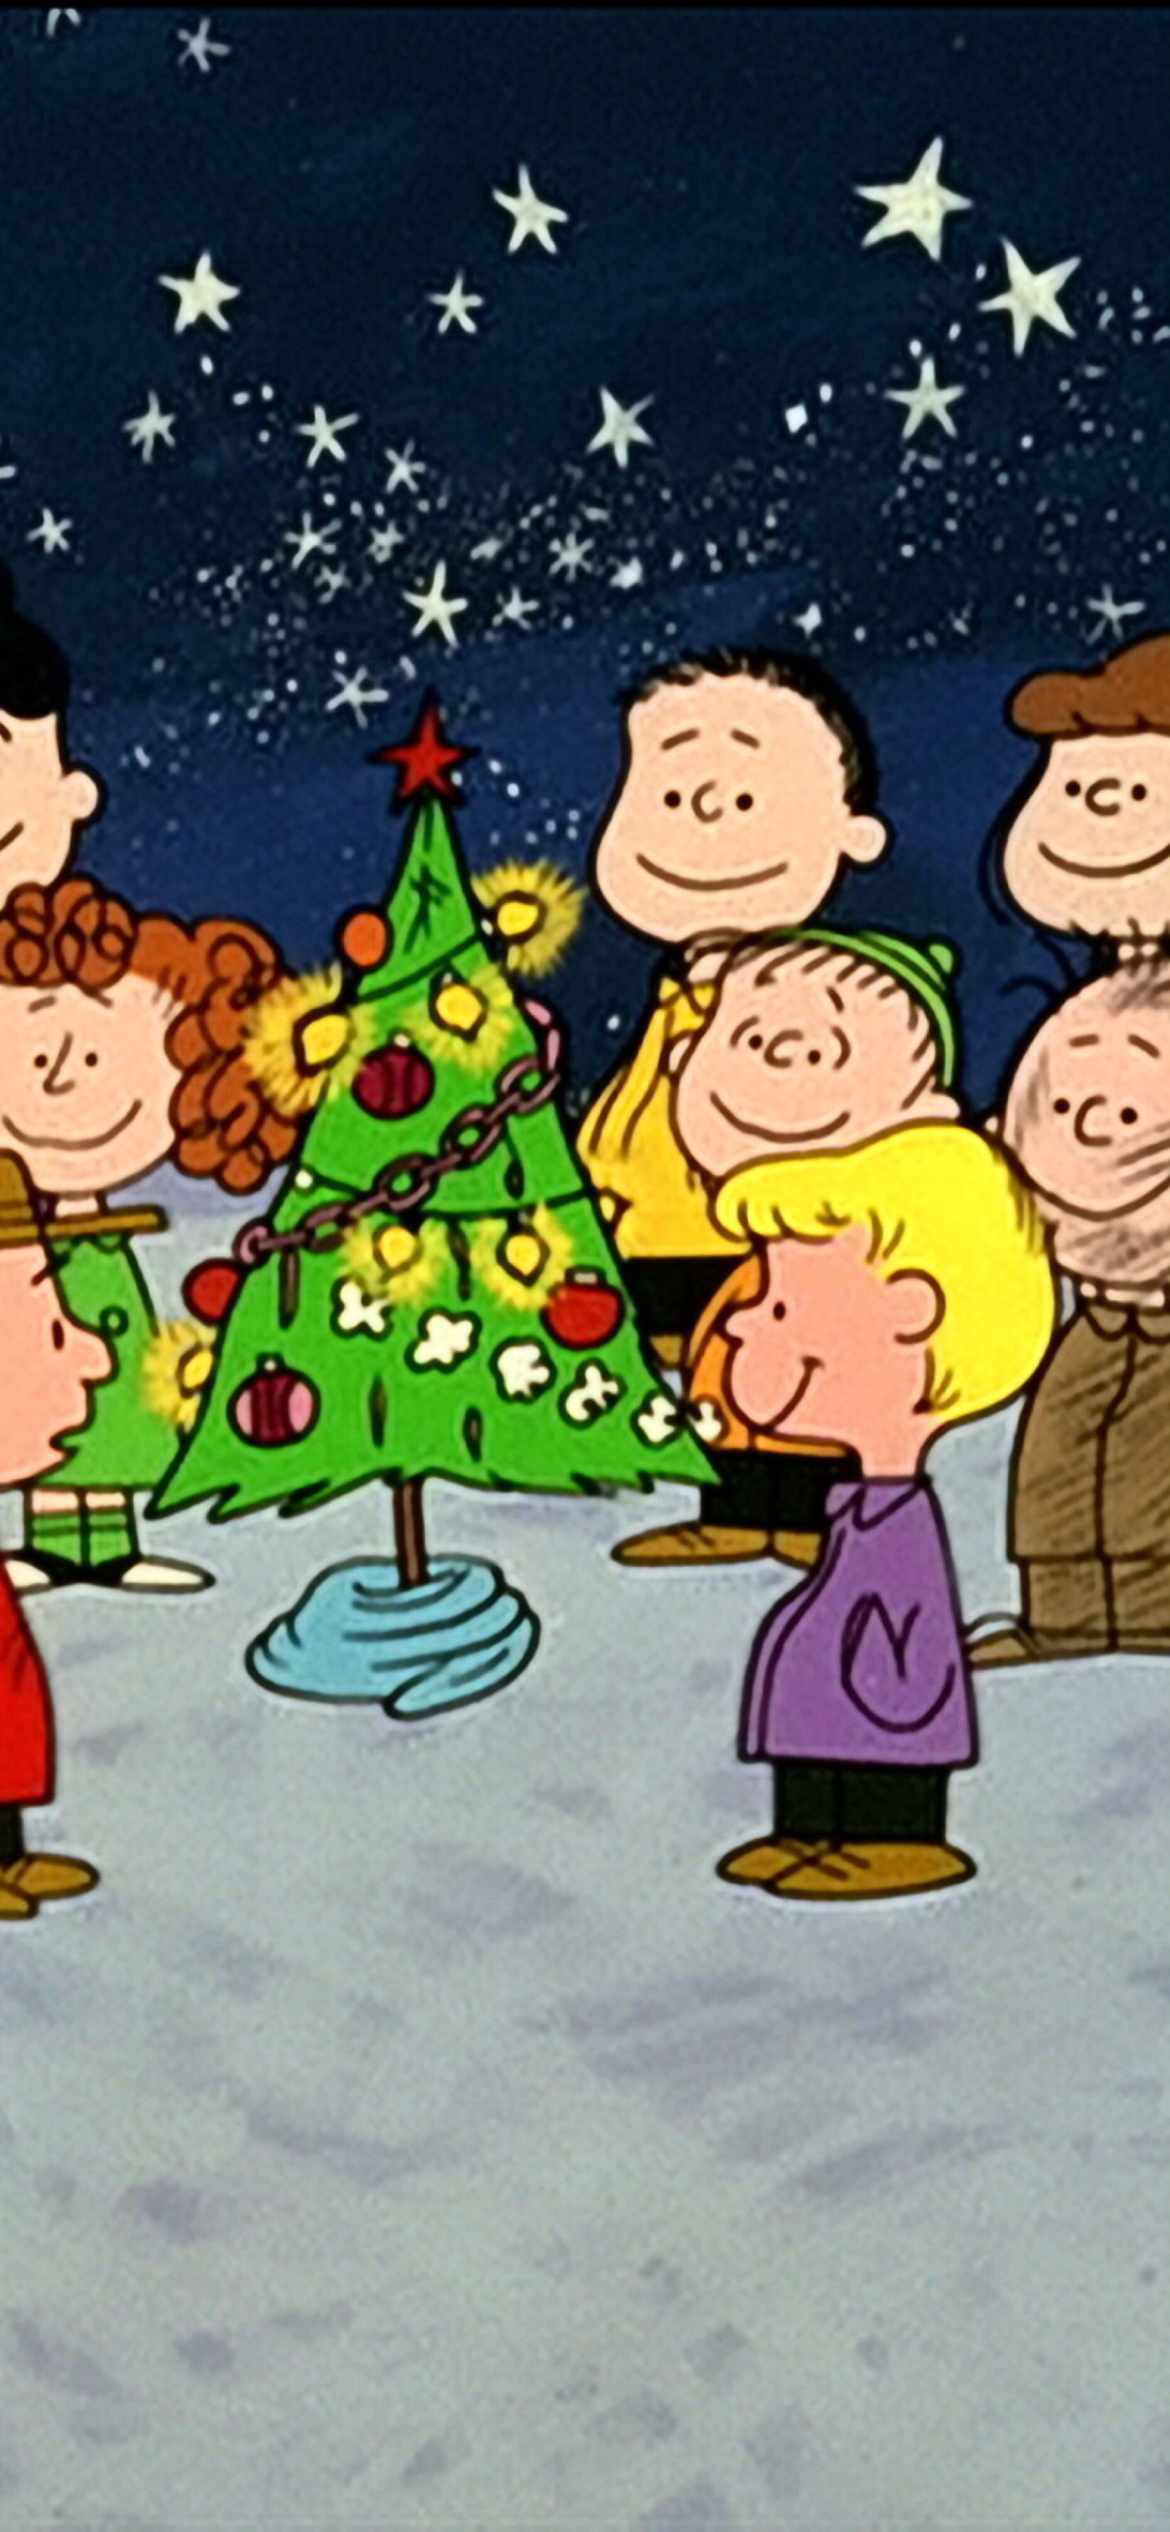 Charlie Brown Christmas Wallpaper 49 images